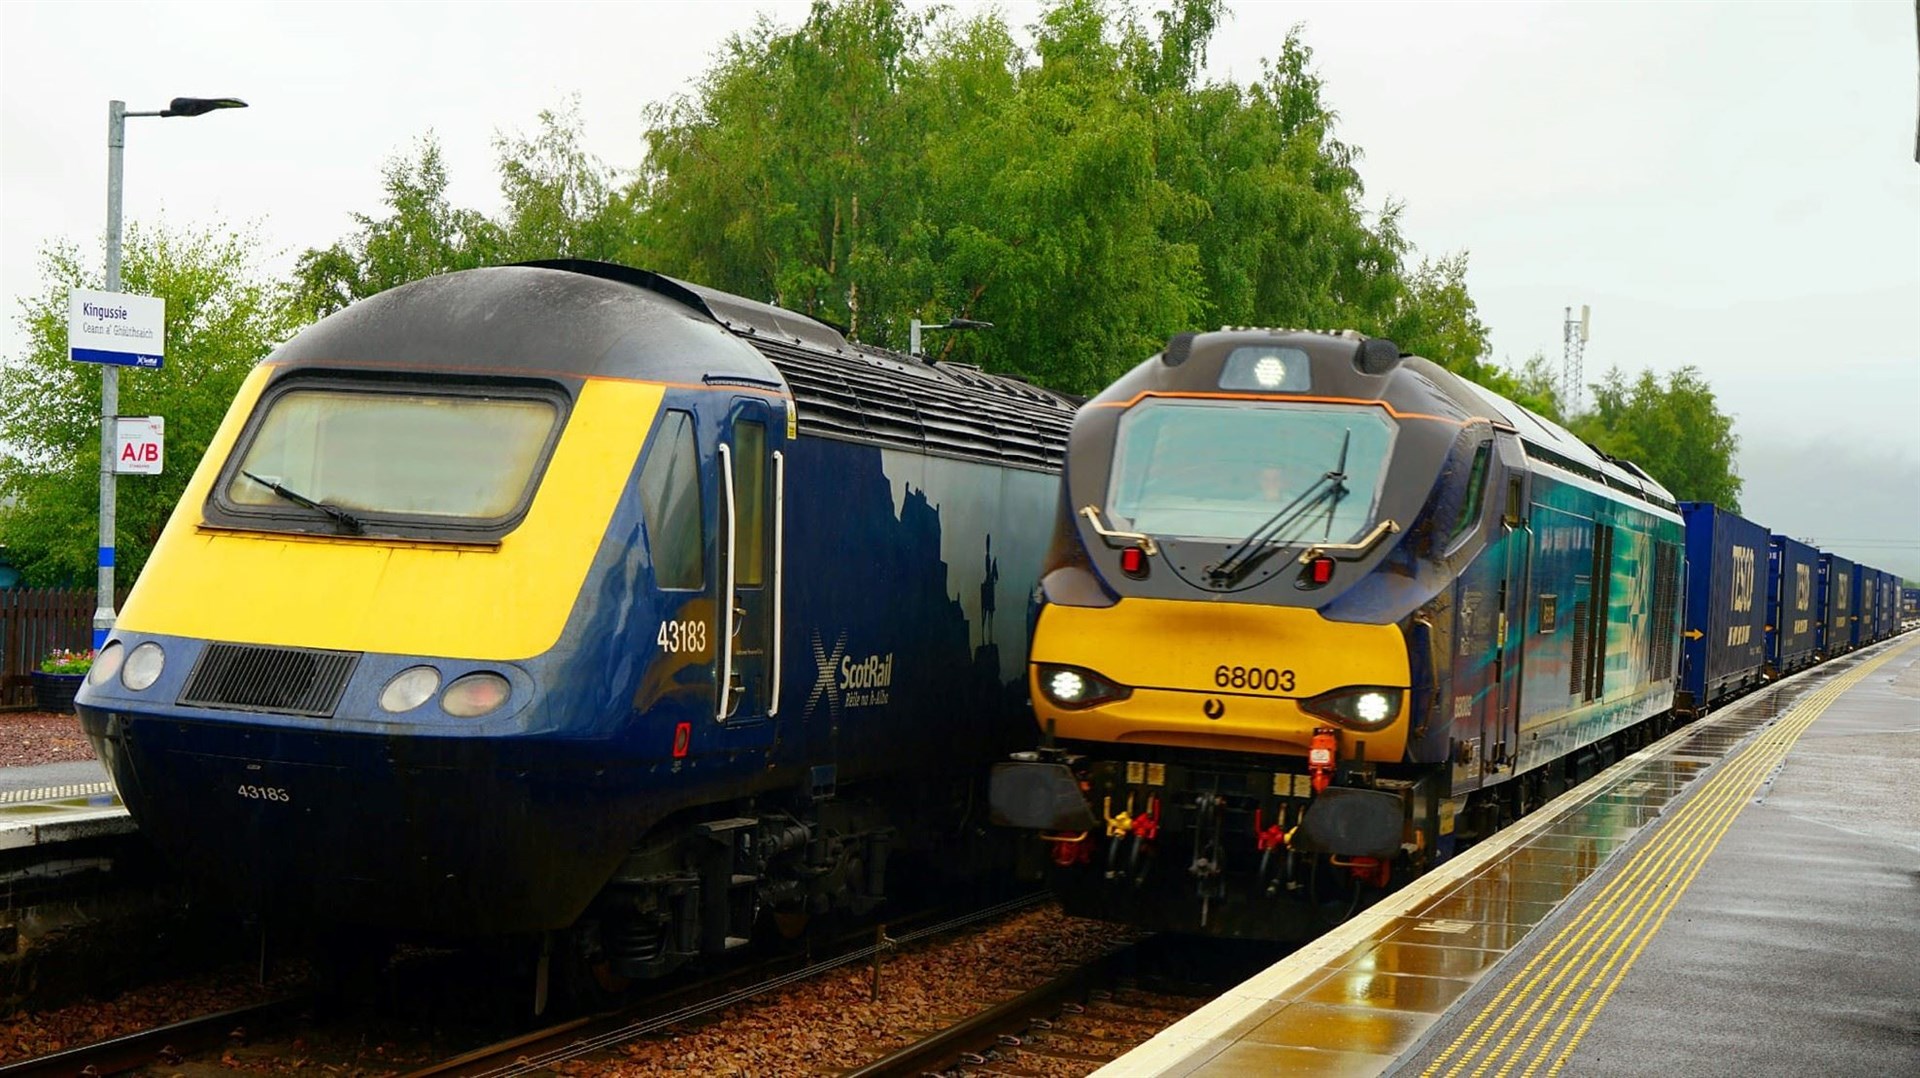 The service is returning to normal today with some exceptions, says ScotRail